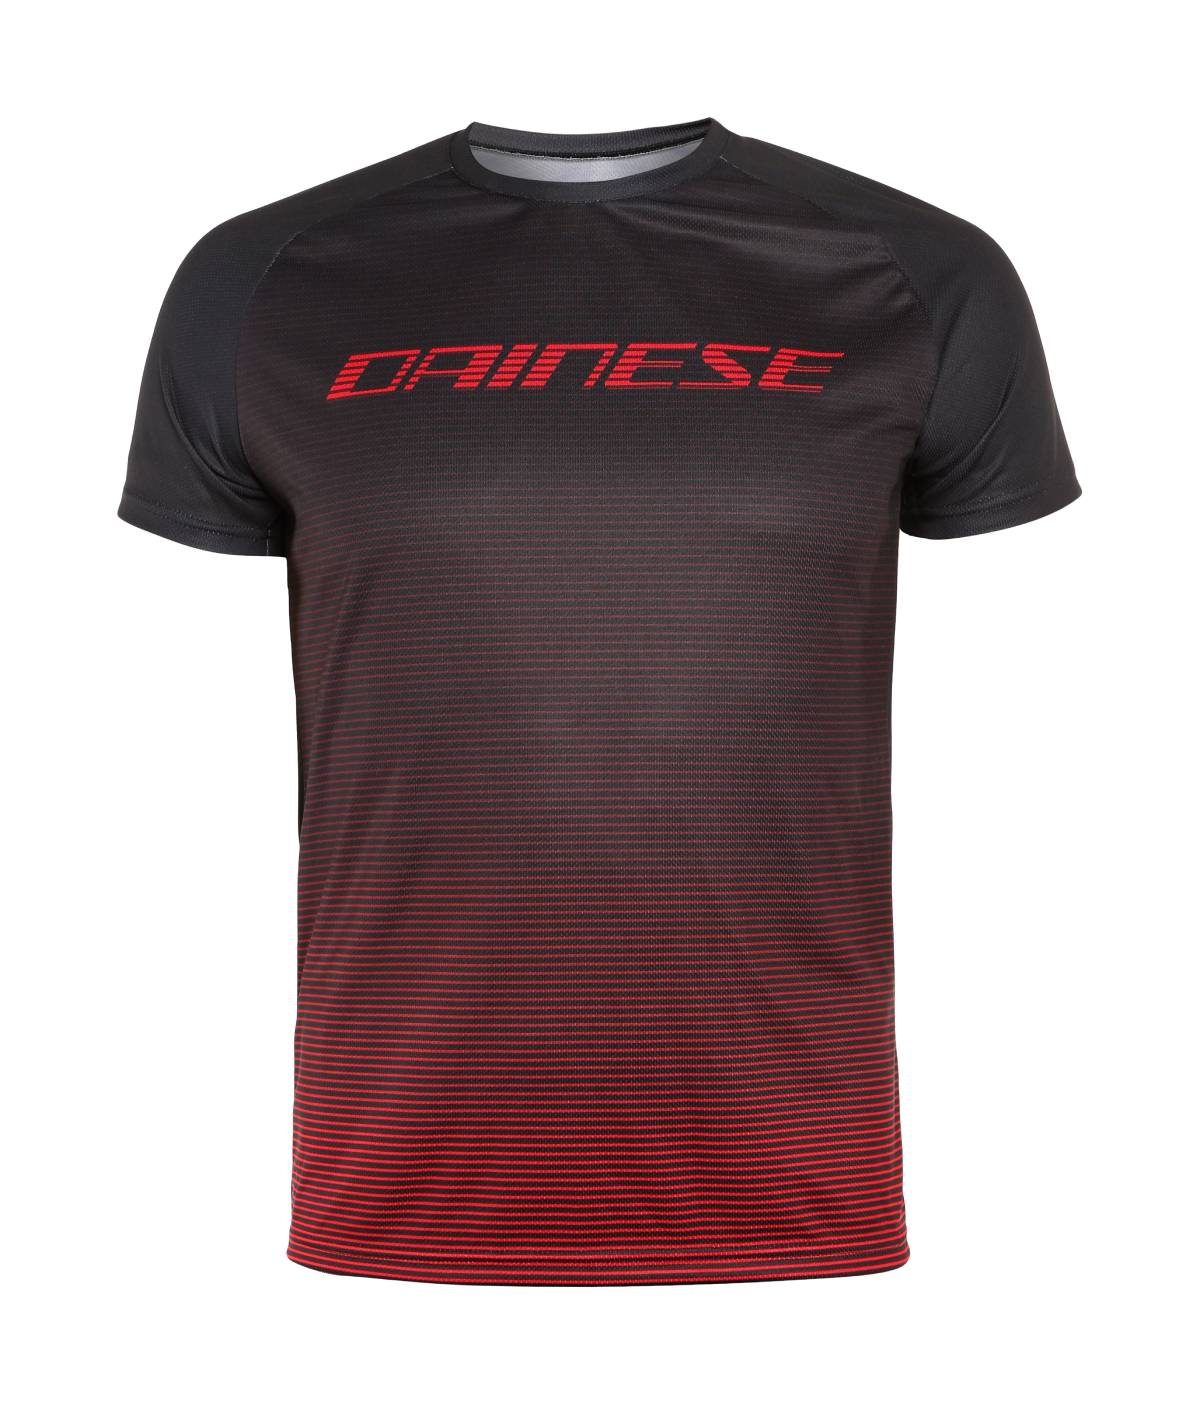 JERSEY DAINESE HG TEE 3 Y41 STRETCH-LIMO